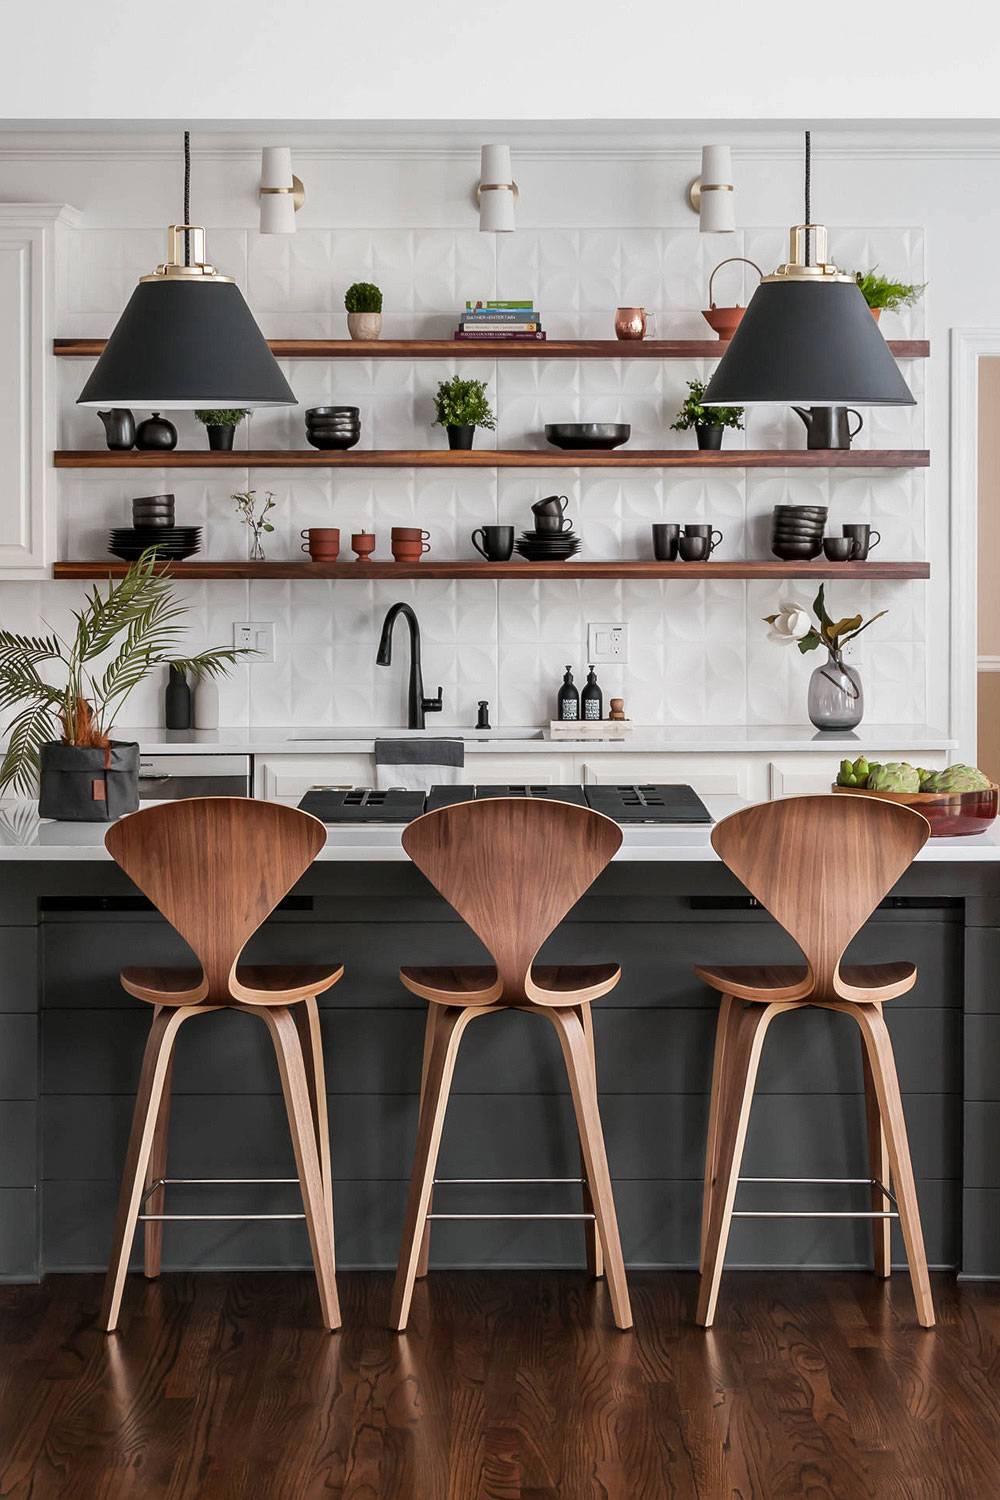 Open shelving replaces the cupboard for an airy feel (from Houzz)